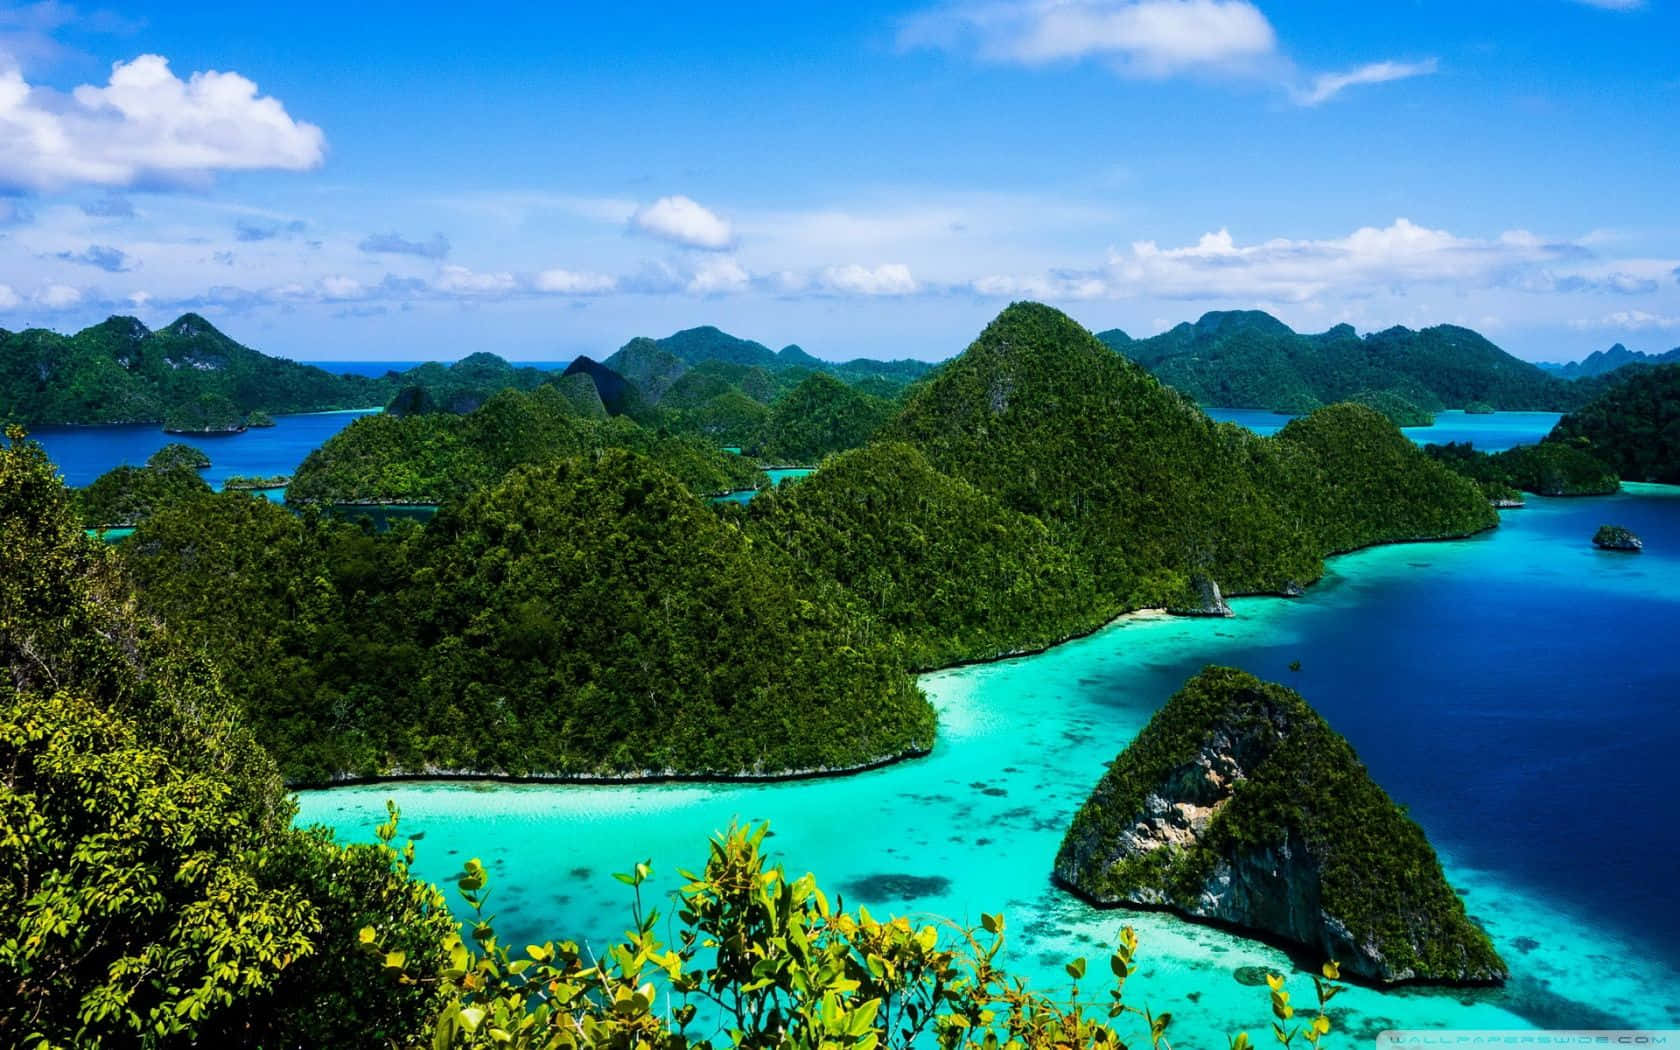 Breathtaking Landscape of the Islands of Indonesia